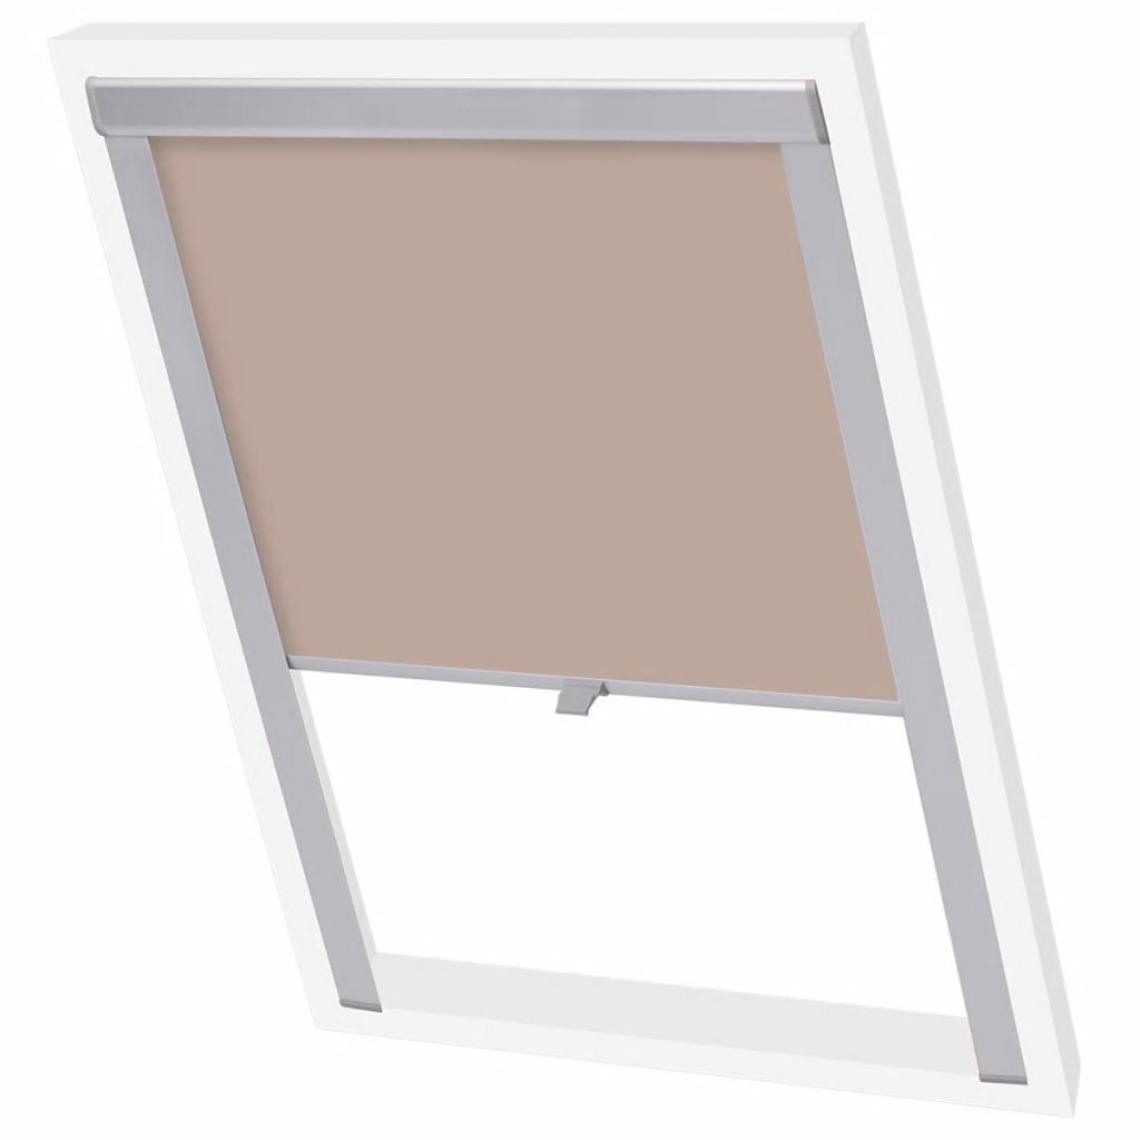 Hucoco - Store enrouleur occultant Beige F06 - Beige - Store compatible Velux